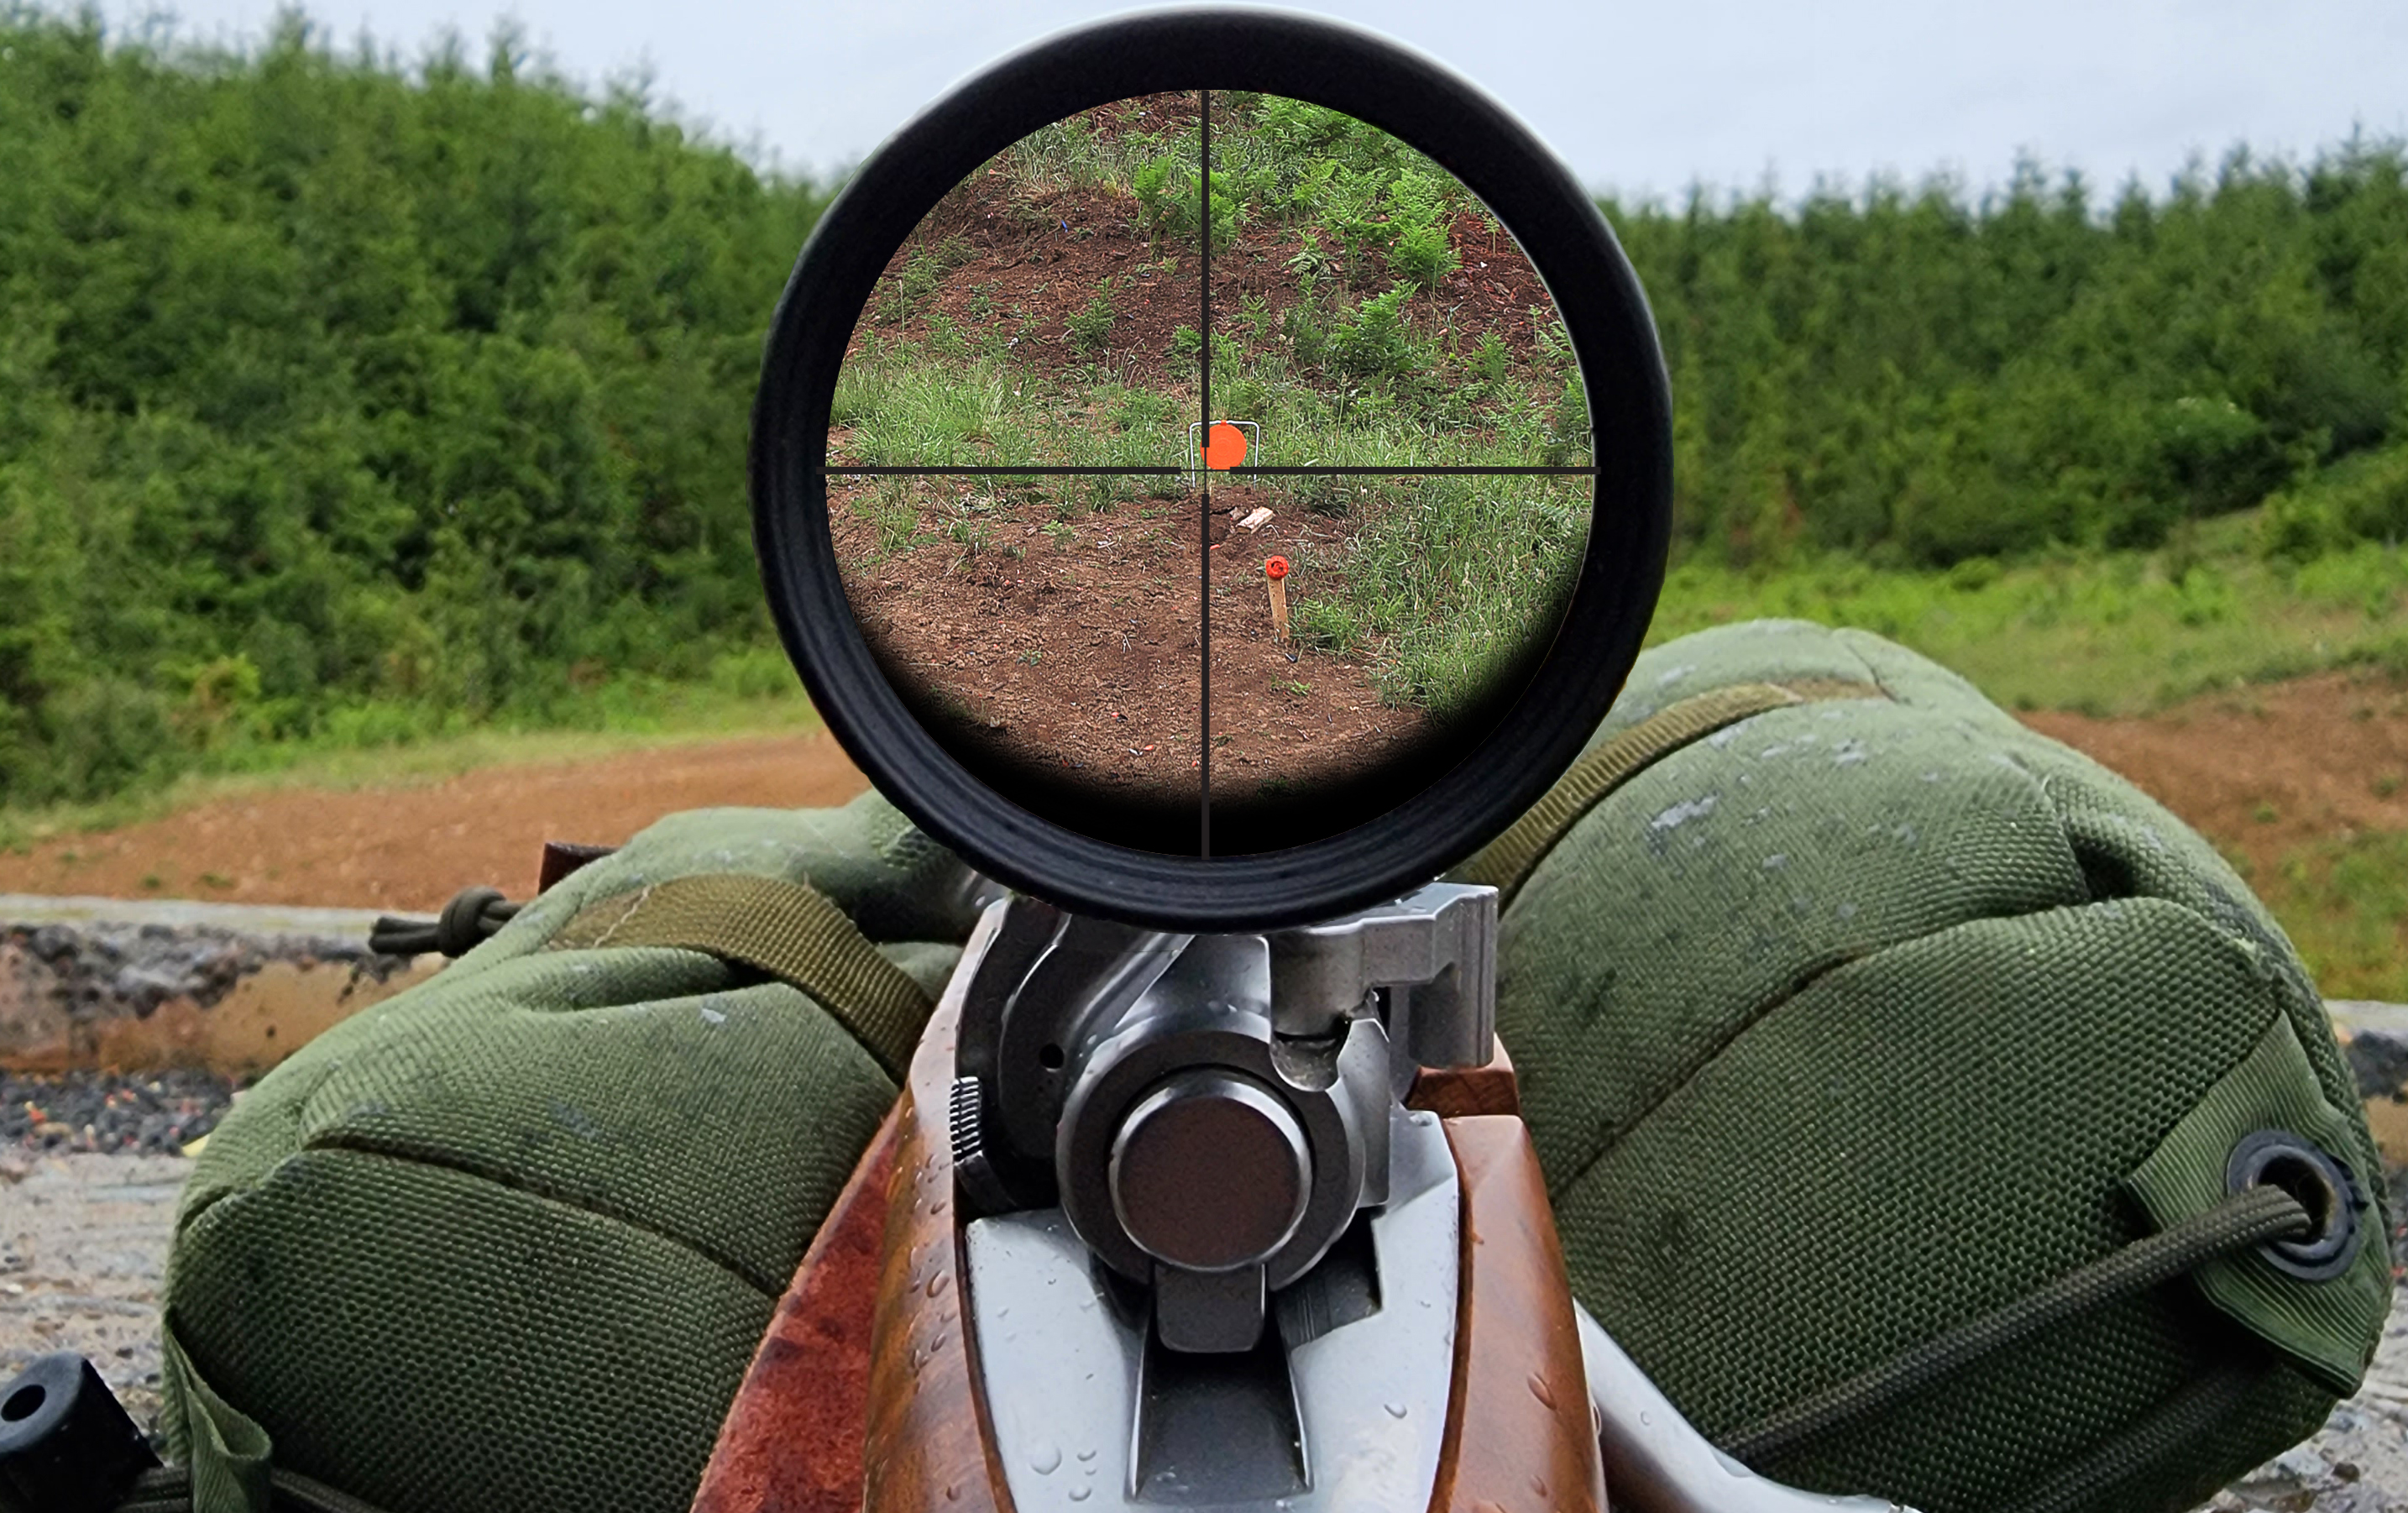 scope sitting too low for full sight picture